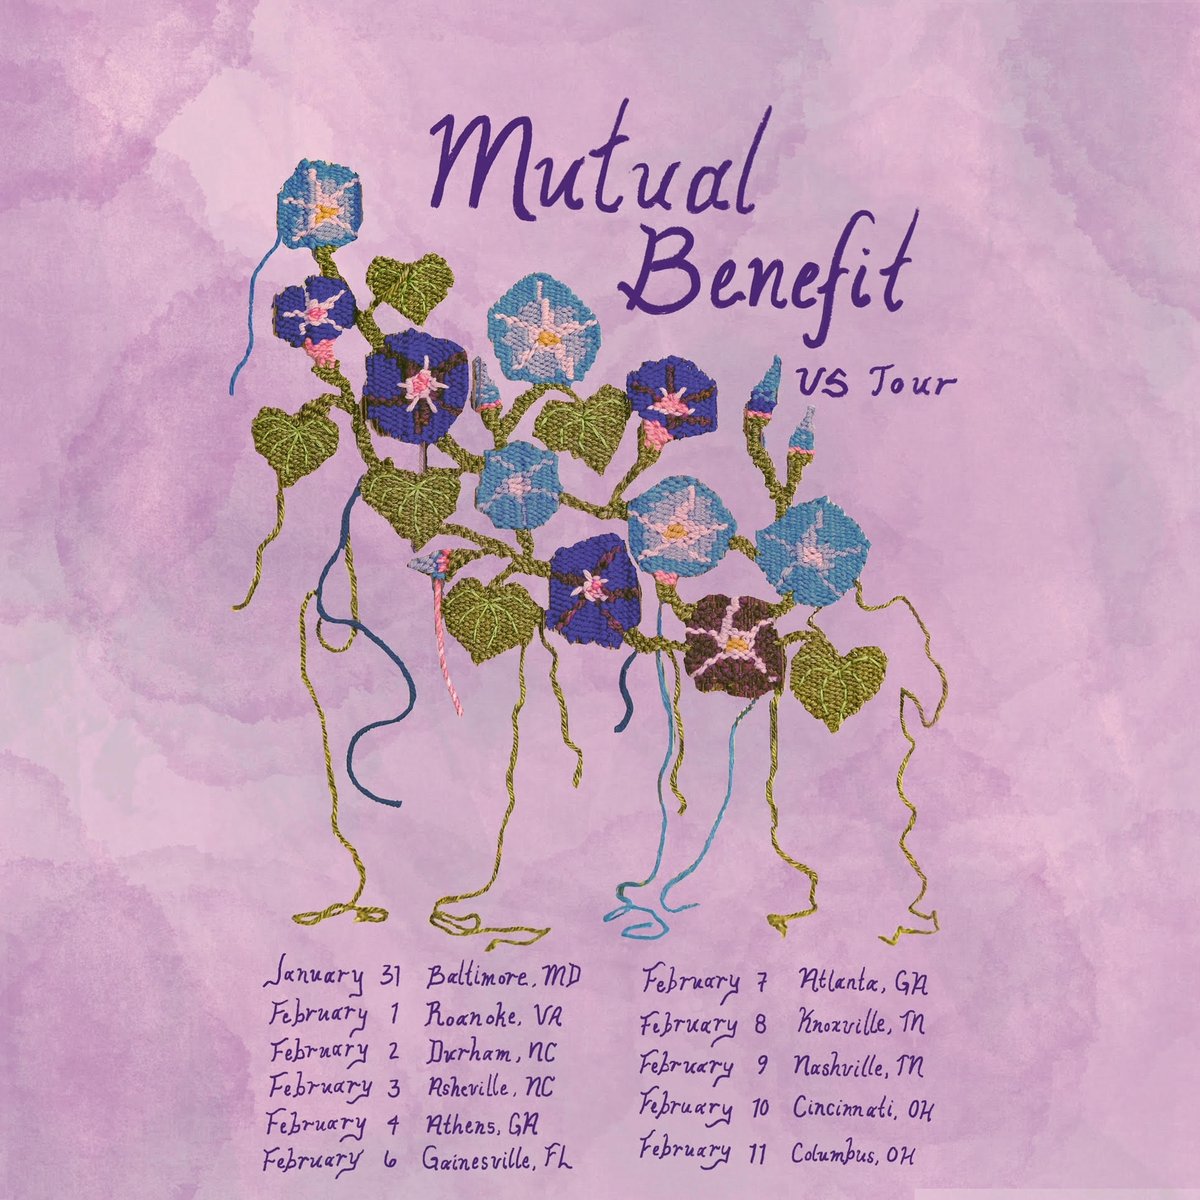 Announcing US tour dates for February! More info here: mutualbenef.it/winter-touring/